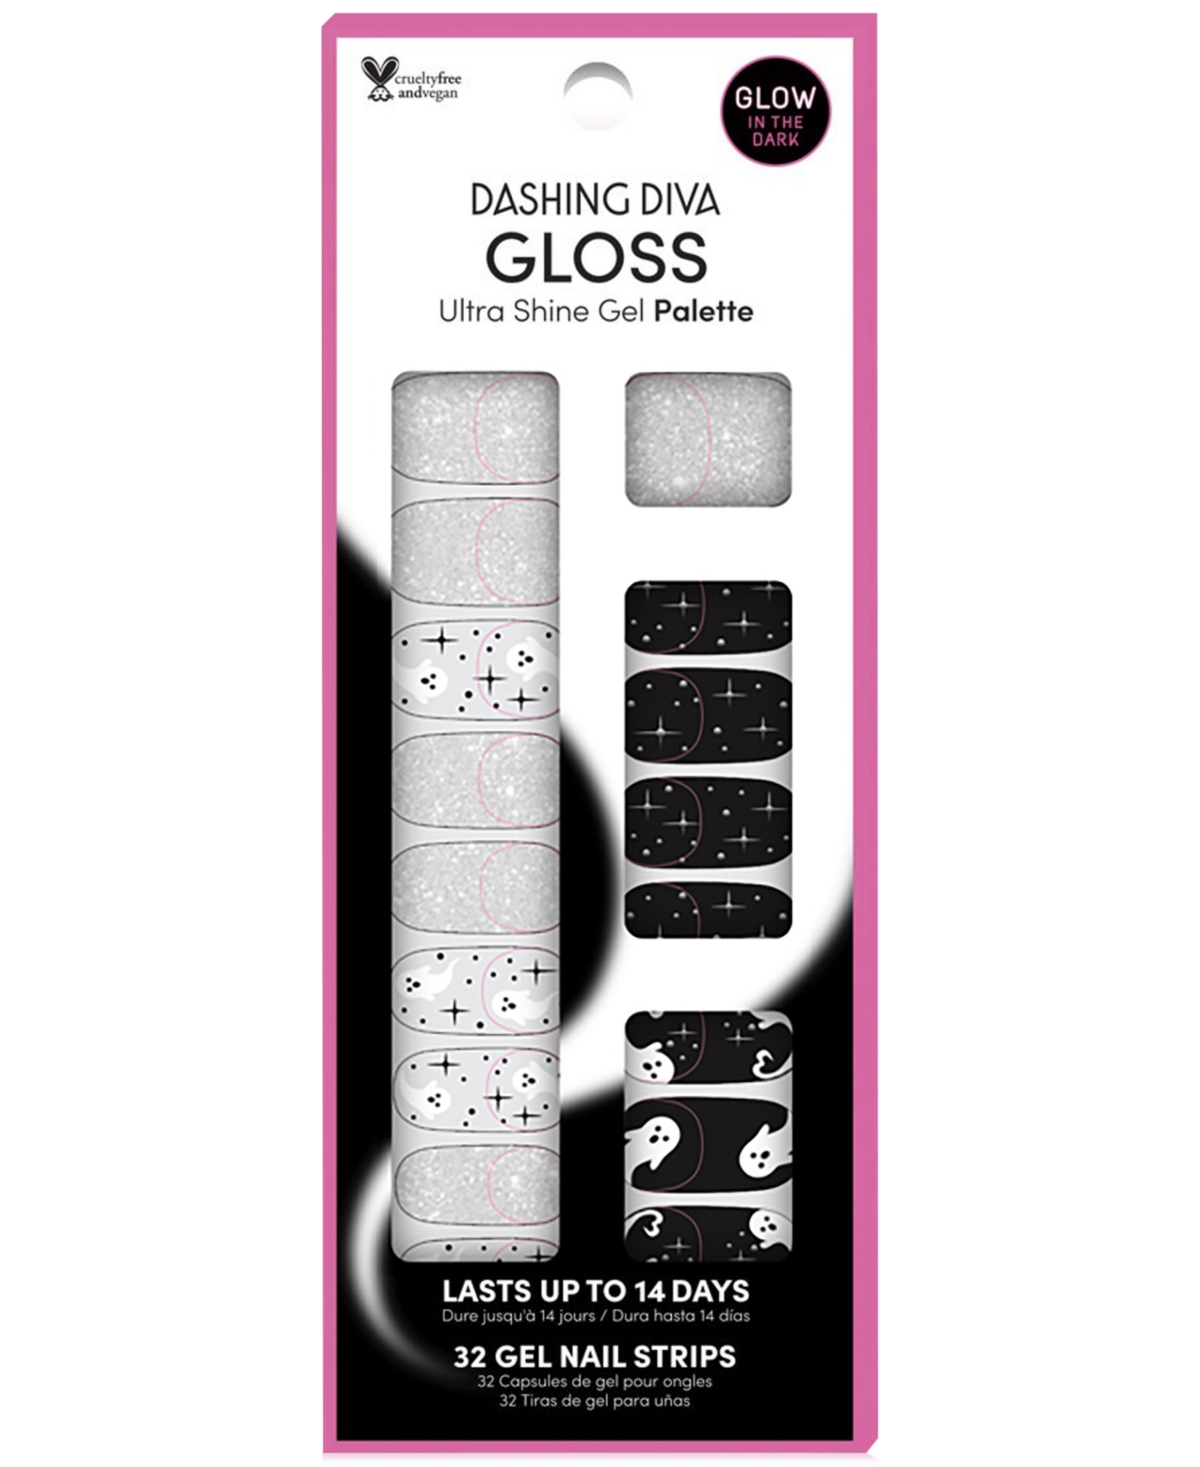 Dashing Diva Gloss Ultra Shine Gel Palette - Ghostly Touch In Silver